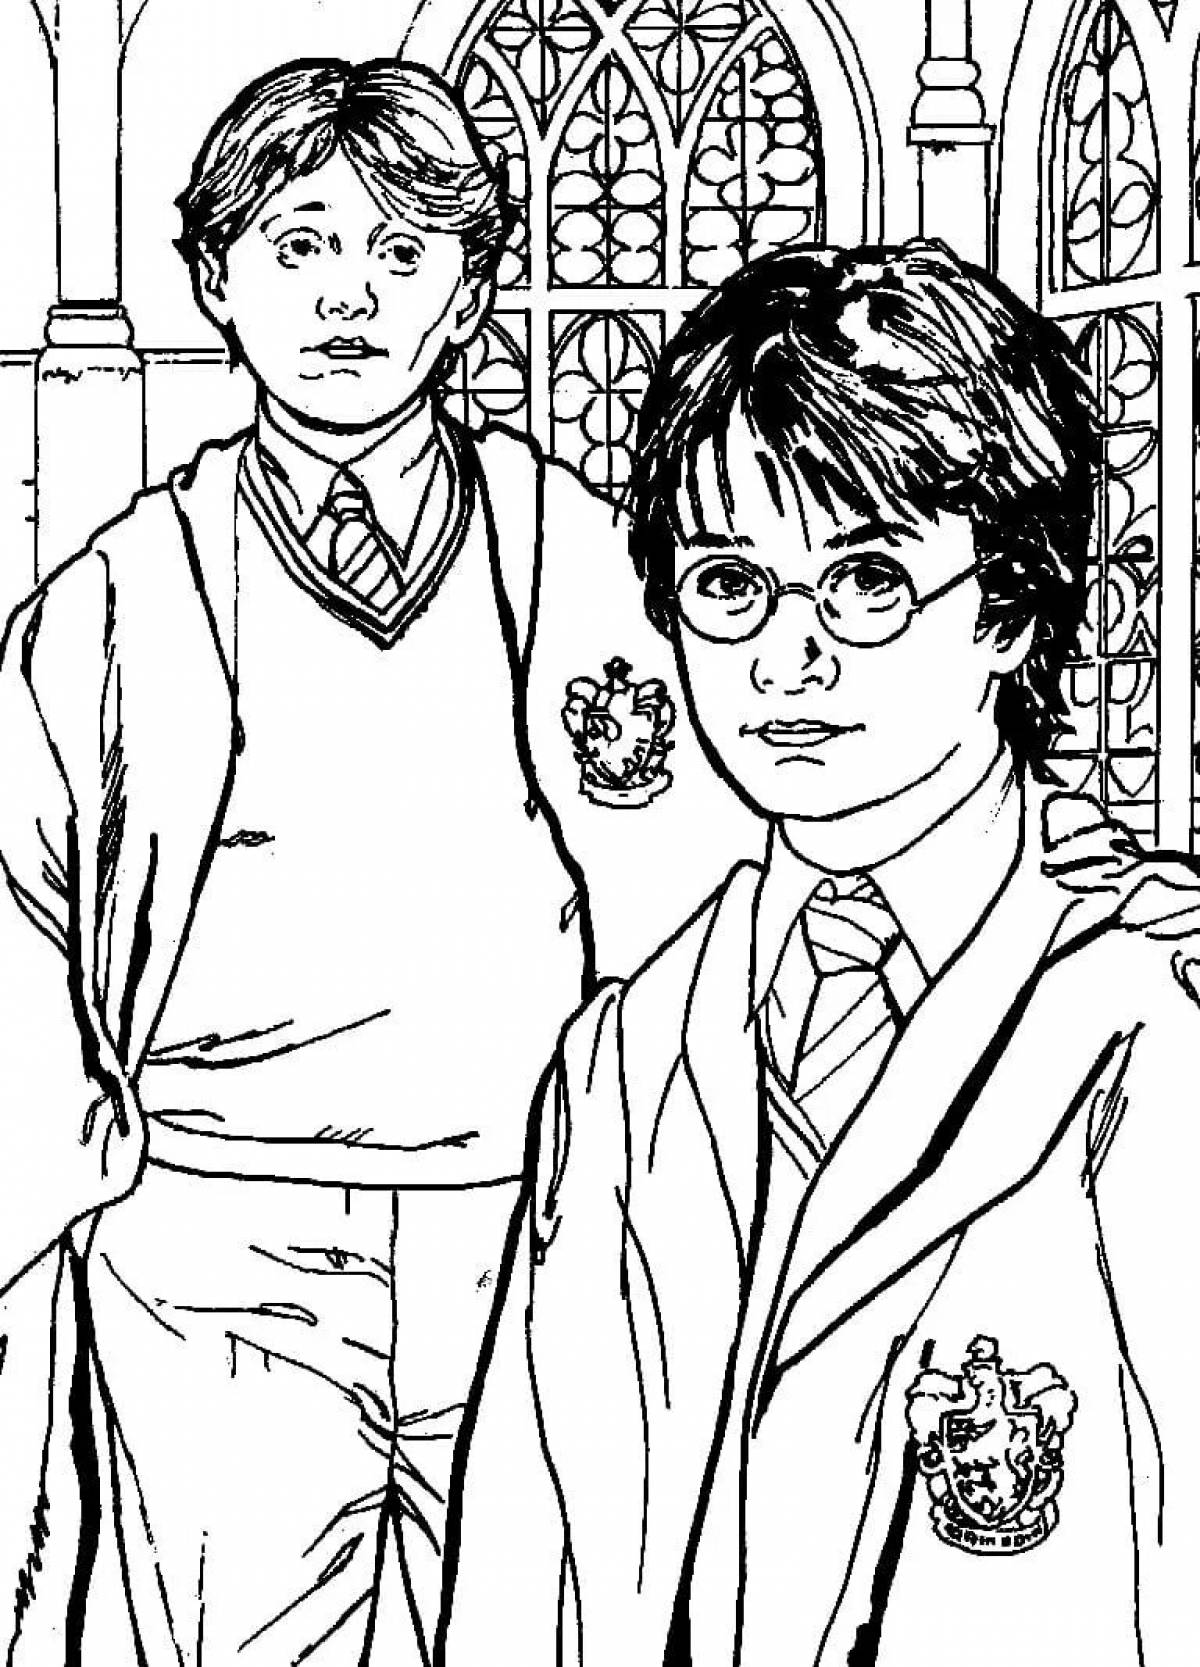 Harry Potter School of Witchcraft and Wizardry Glitter Coloring Book